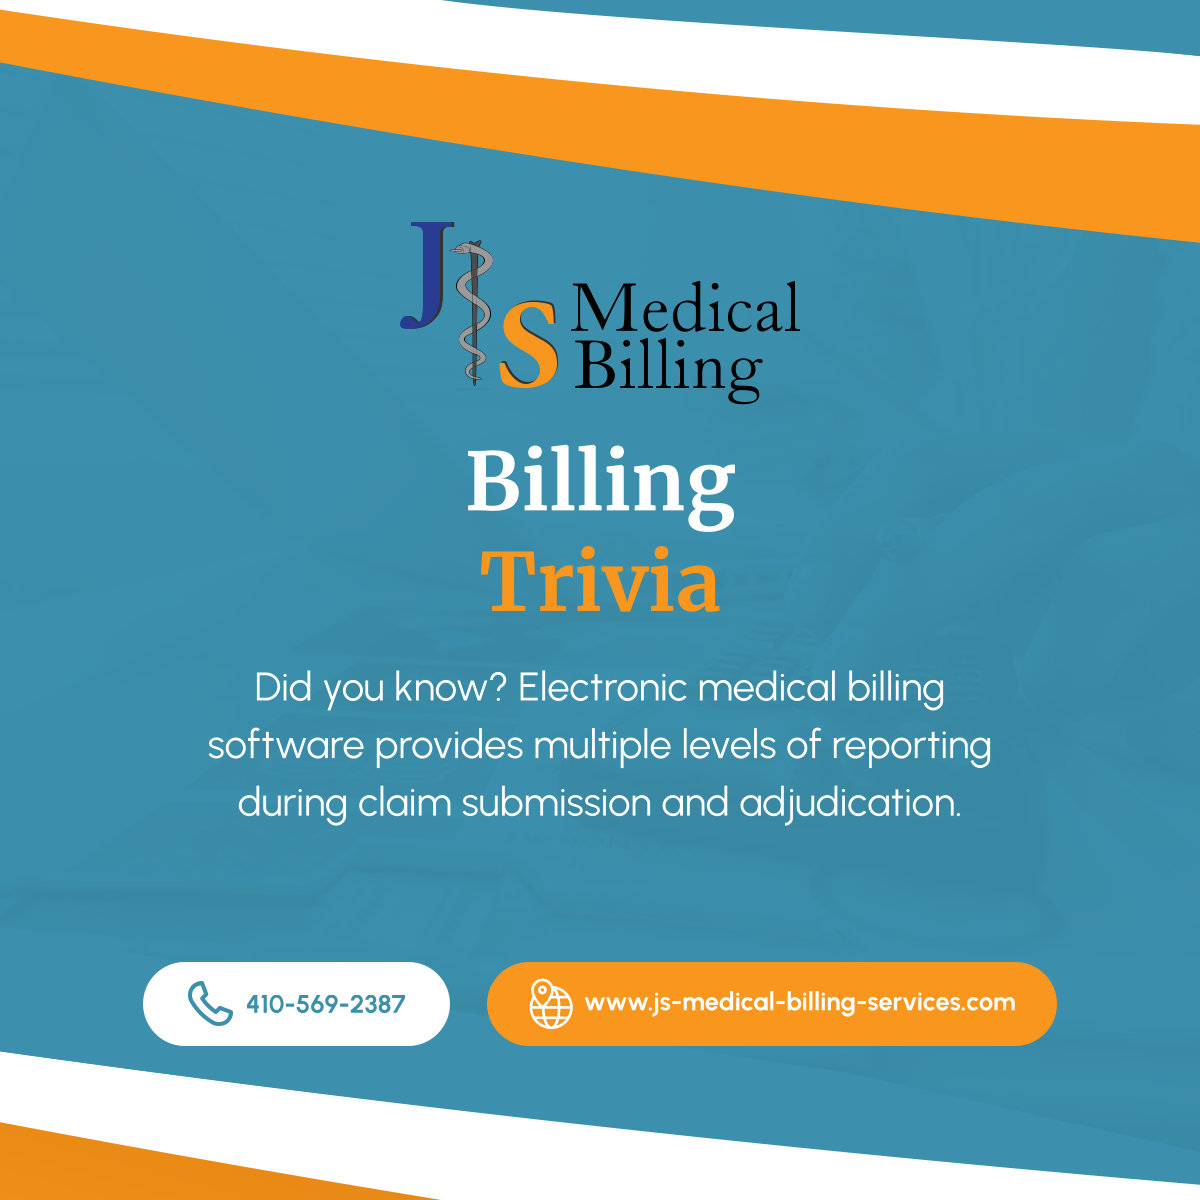 Learn about the complexities of claim processing with us. Efficient processing leads to quicker reimbursements! 

#BelAirMD #MedicalBilling #BillingTrivia